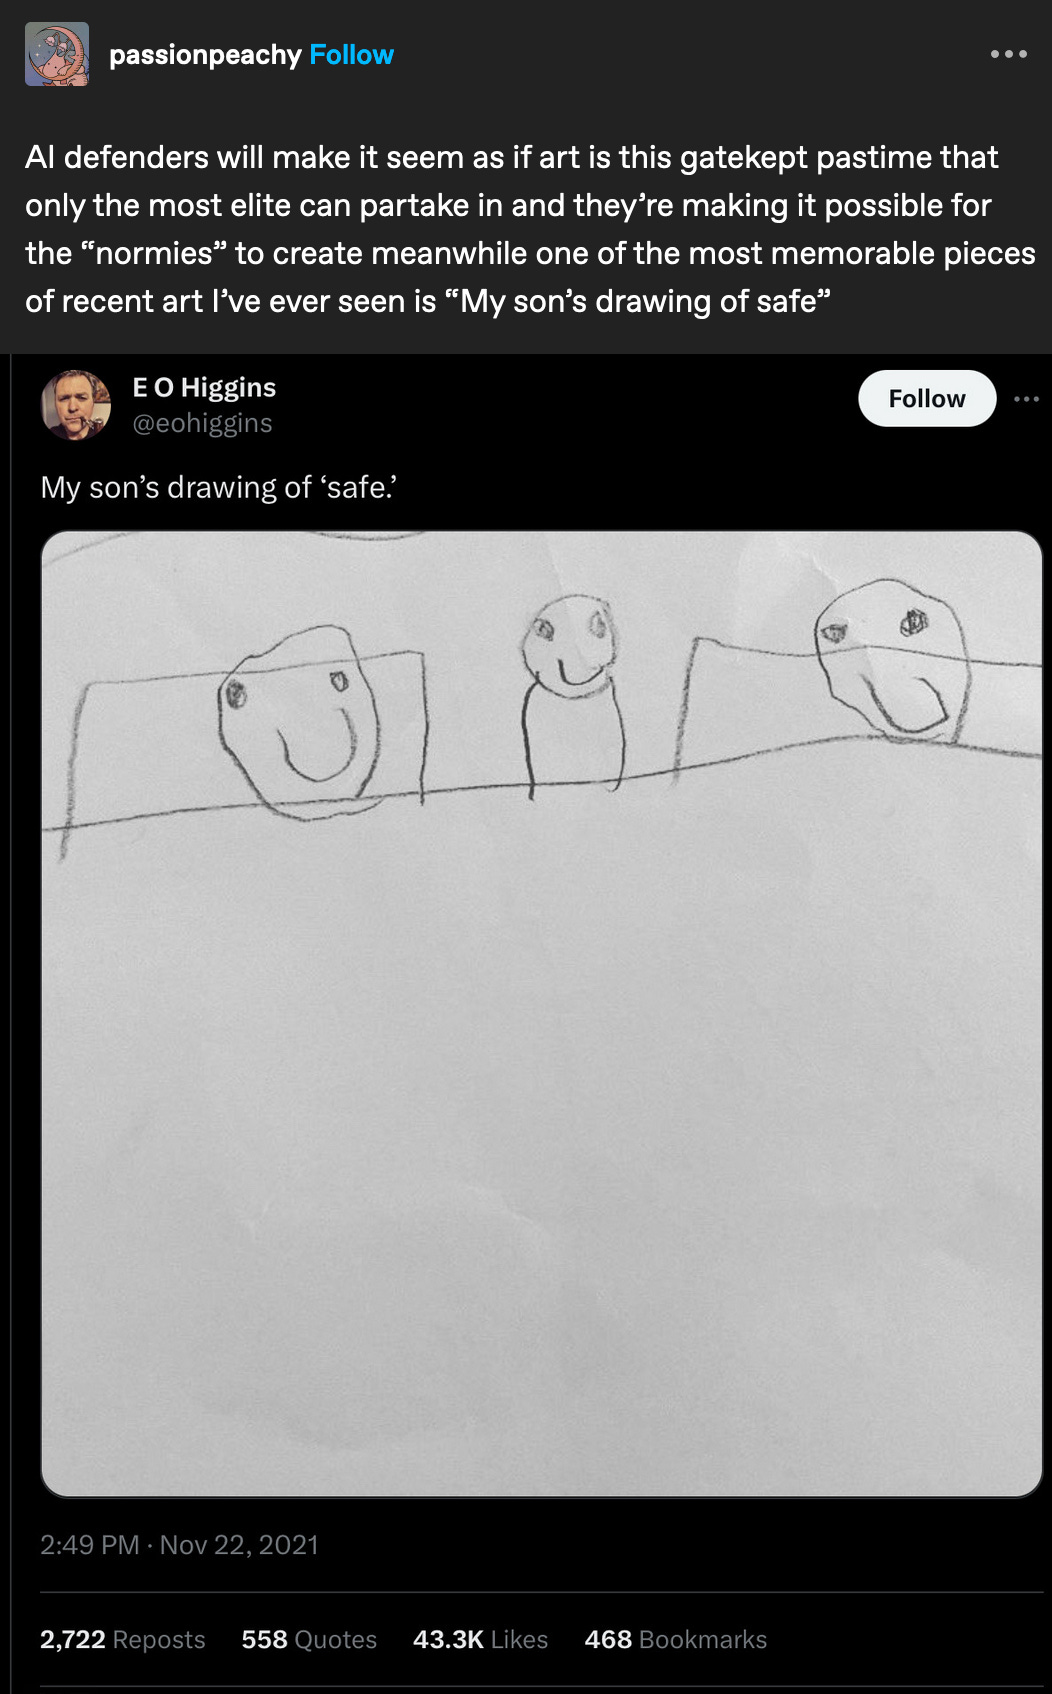 from tumblr user passionpeachy "AI defenders will make it seem as if art is this gatekept pastime that only the most elite can partake in and they’re making it possible for the “normies” to create meanwhile one of the most memorable pieces of recent art I’ve ever seen is 'My son’s drawing of safe'" over a tweet from @eohiggins that says "My son's drawing of safe" and an image of a drawing of 3 simple faces in bed. 